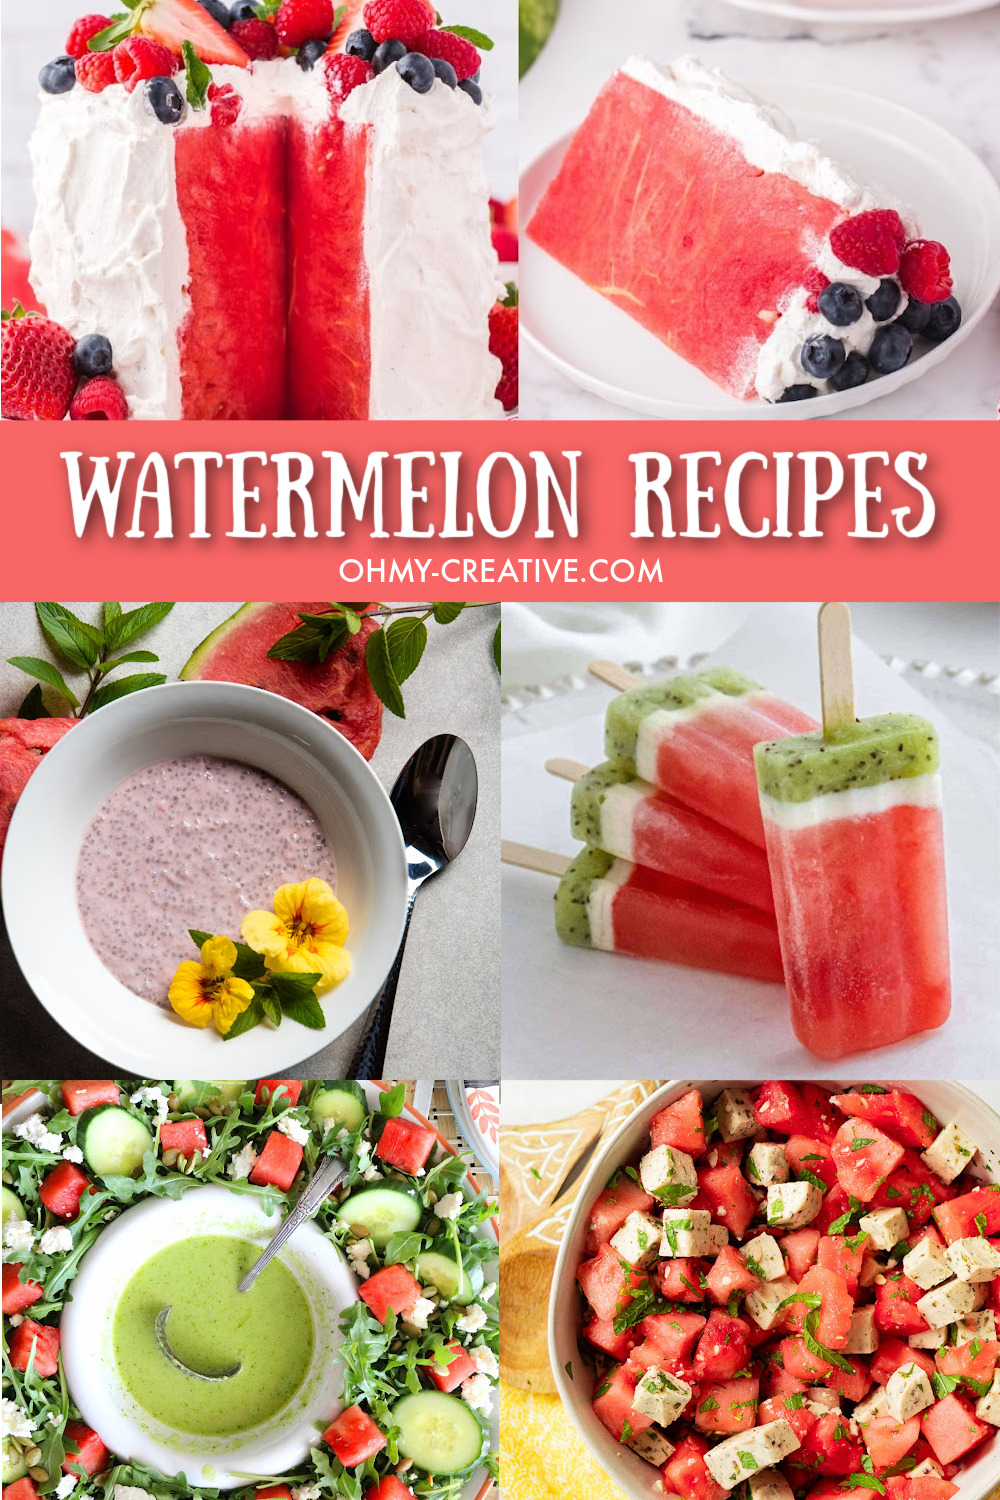 Here is a great collection of sweet and savory watermelon recipes to enjoy all summer long!